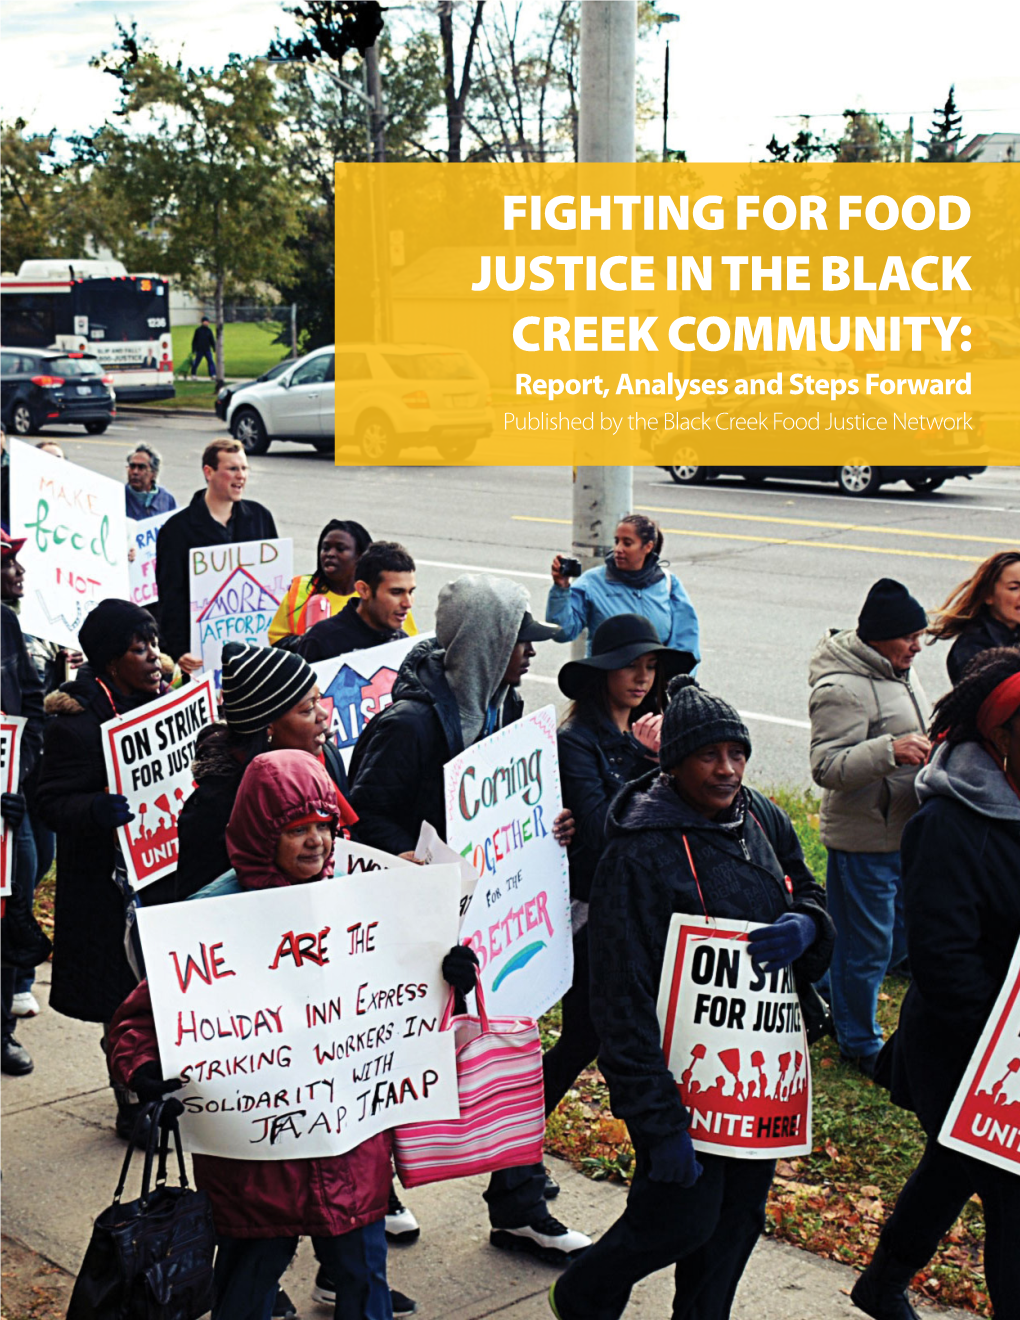 FIGHTING for FOOD JUSTICE in the BLACK CREEK COMMUNITY: Report, Analyses and Steps Forward Published by the Black Creek Food Justice Network